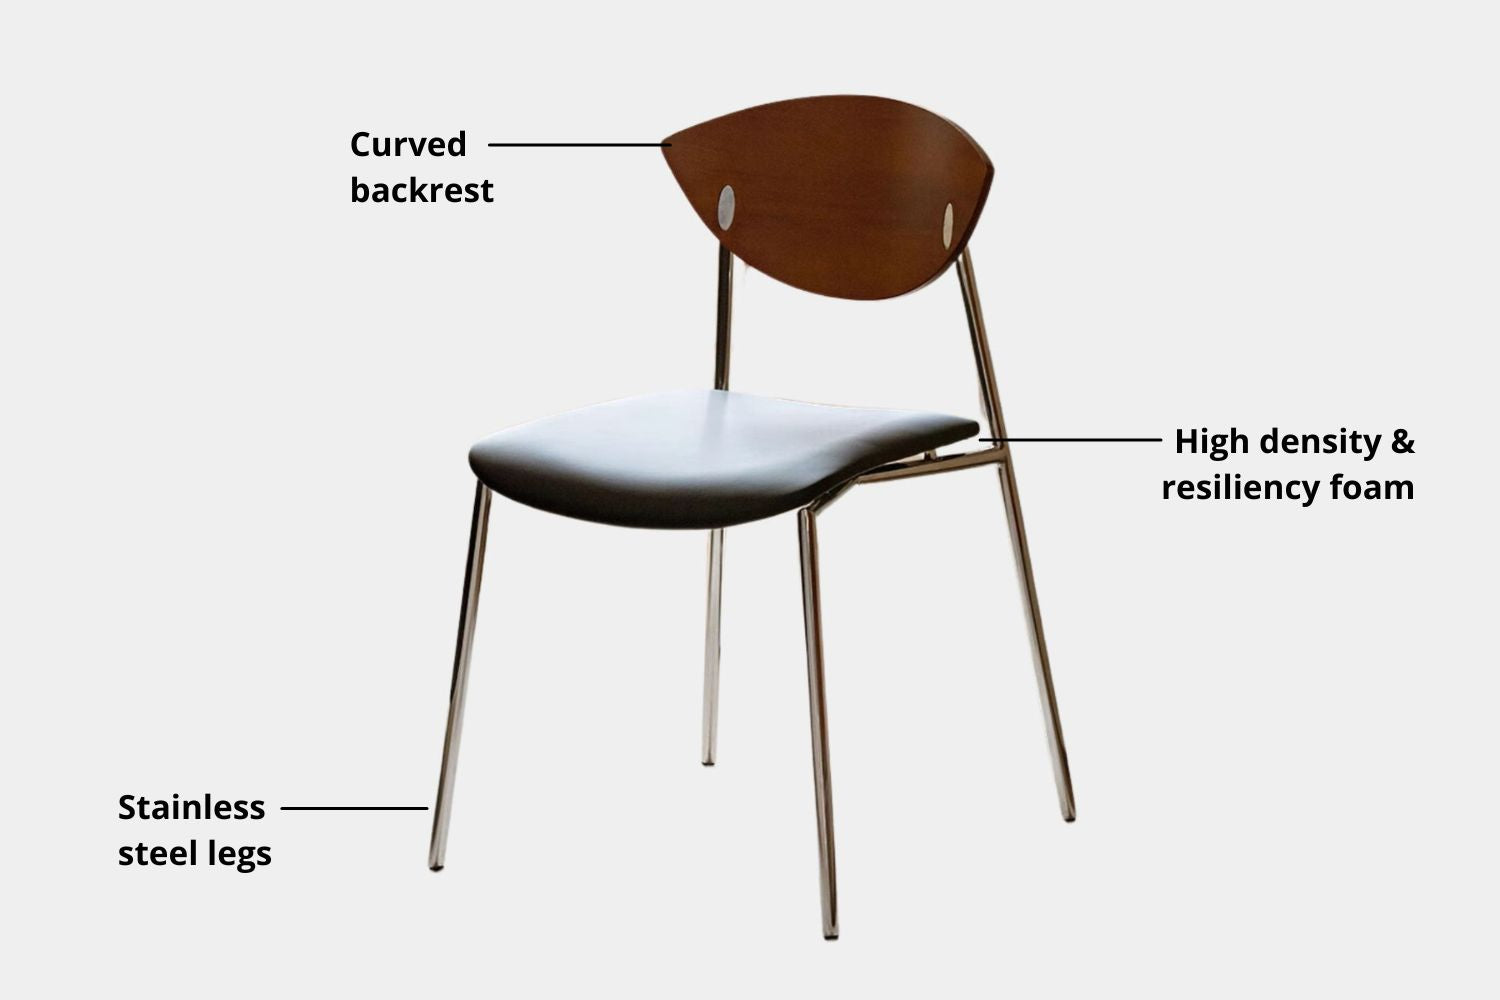 Key features for product for Tyra Stainless Steel Chair